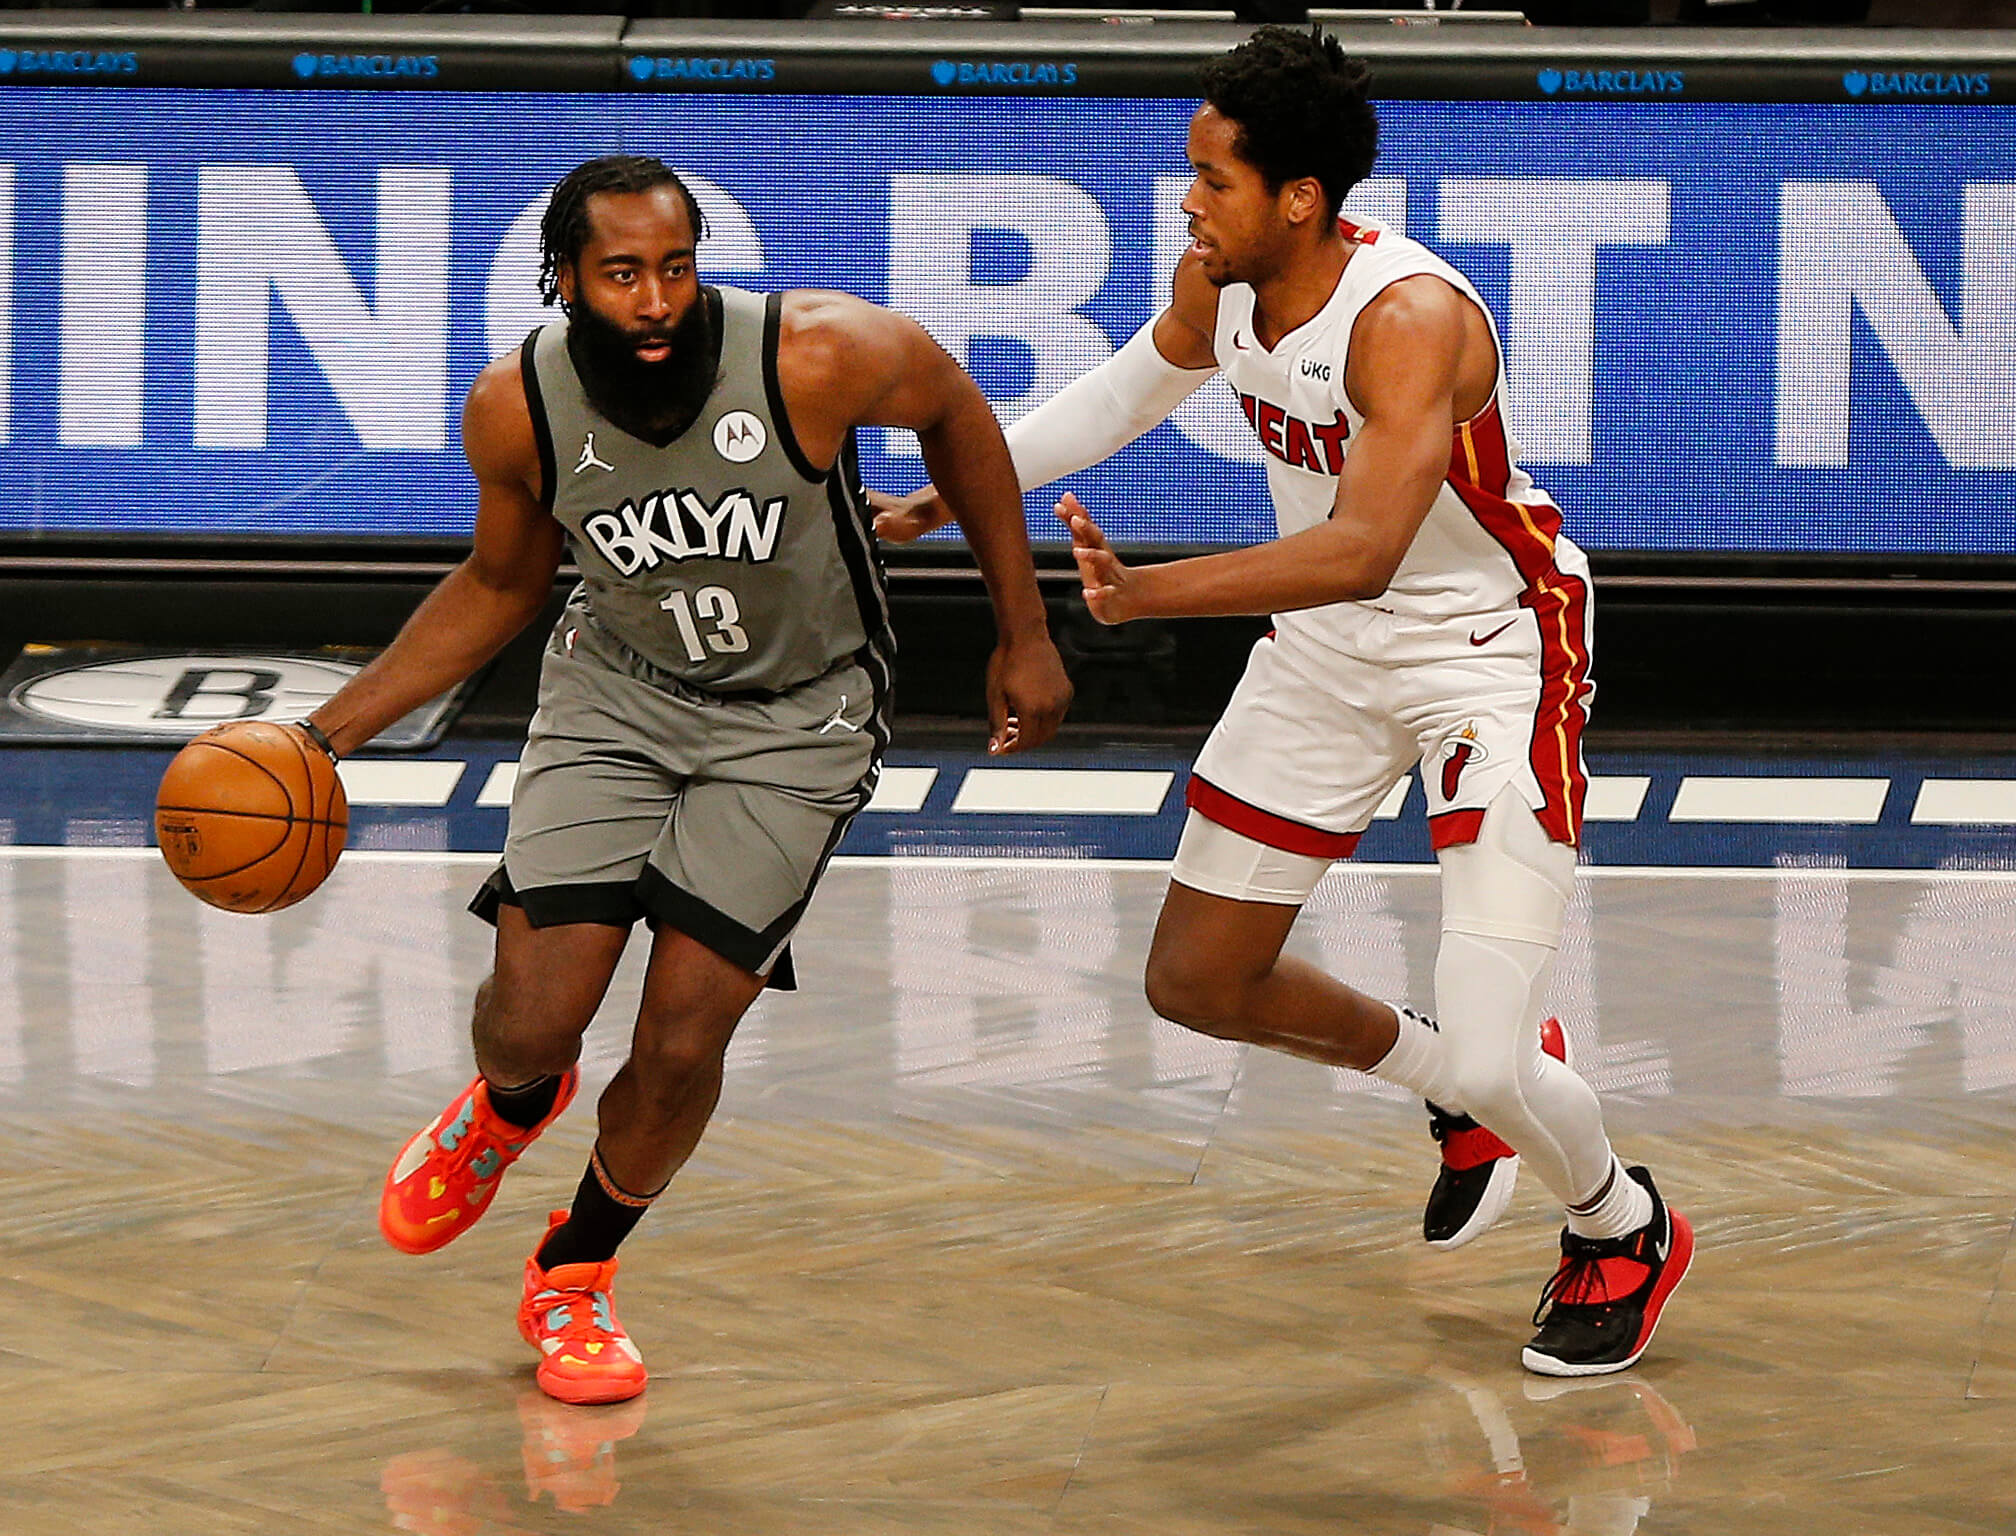 Nets Notes: James Harden, Kyrie Irving, Kevin Durant a Big Three for Big  Moments